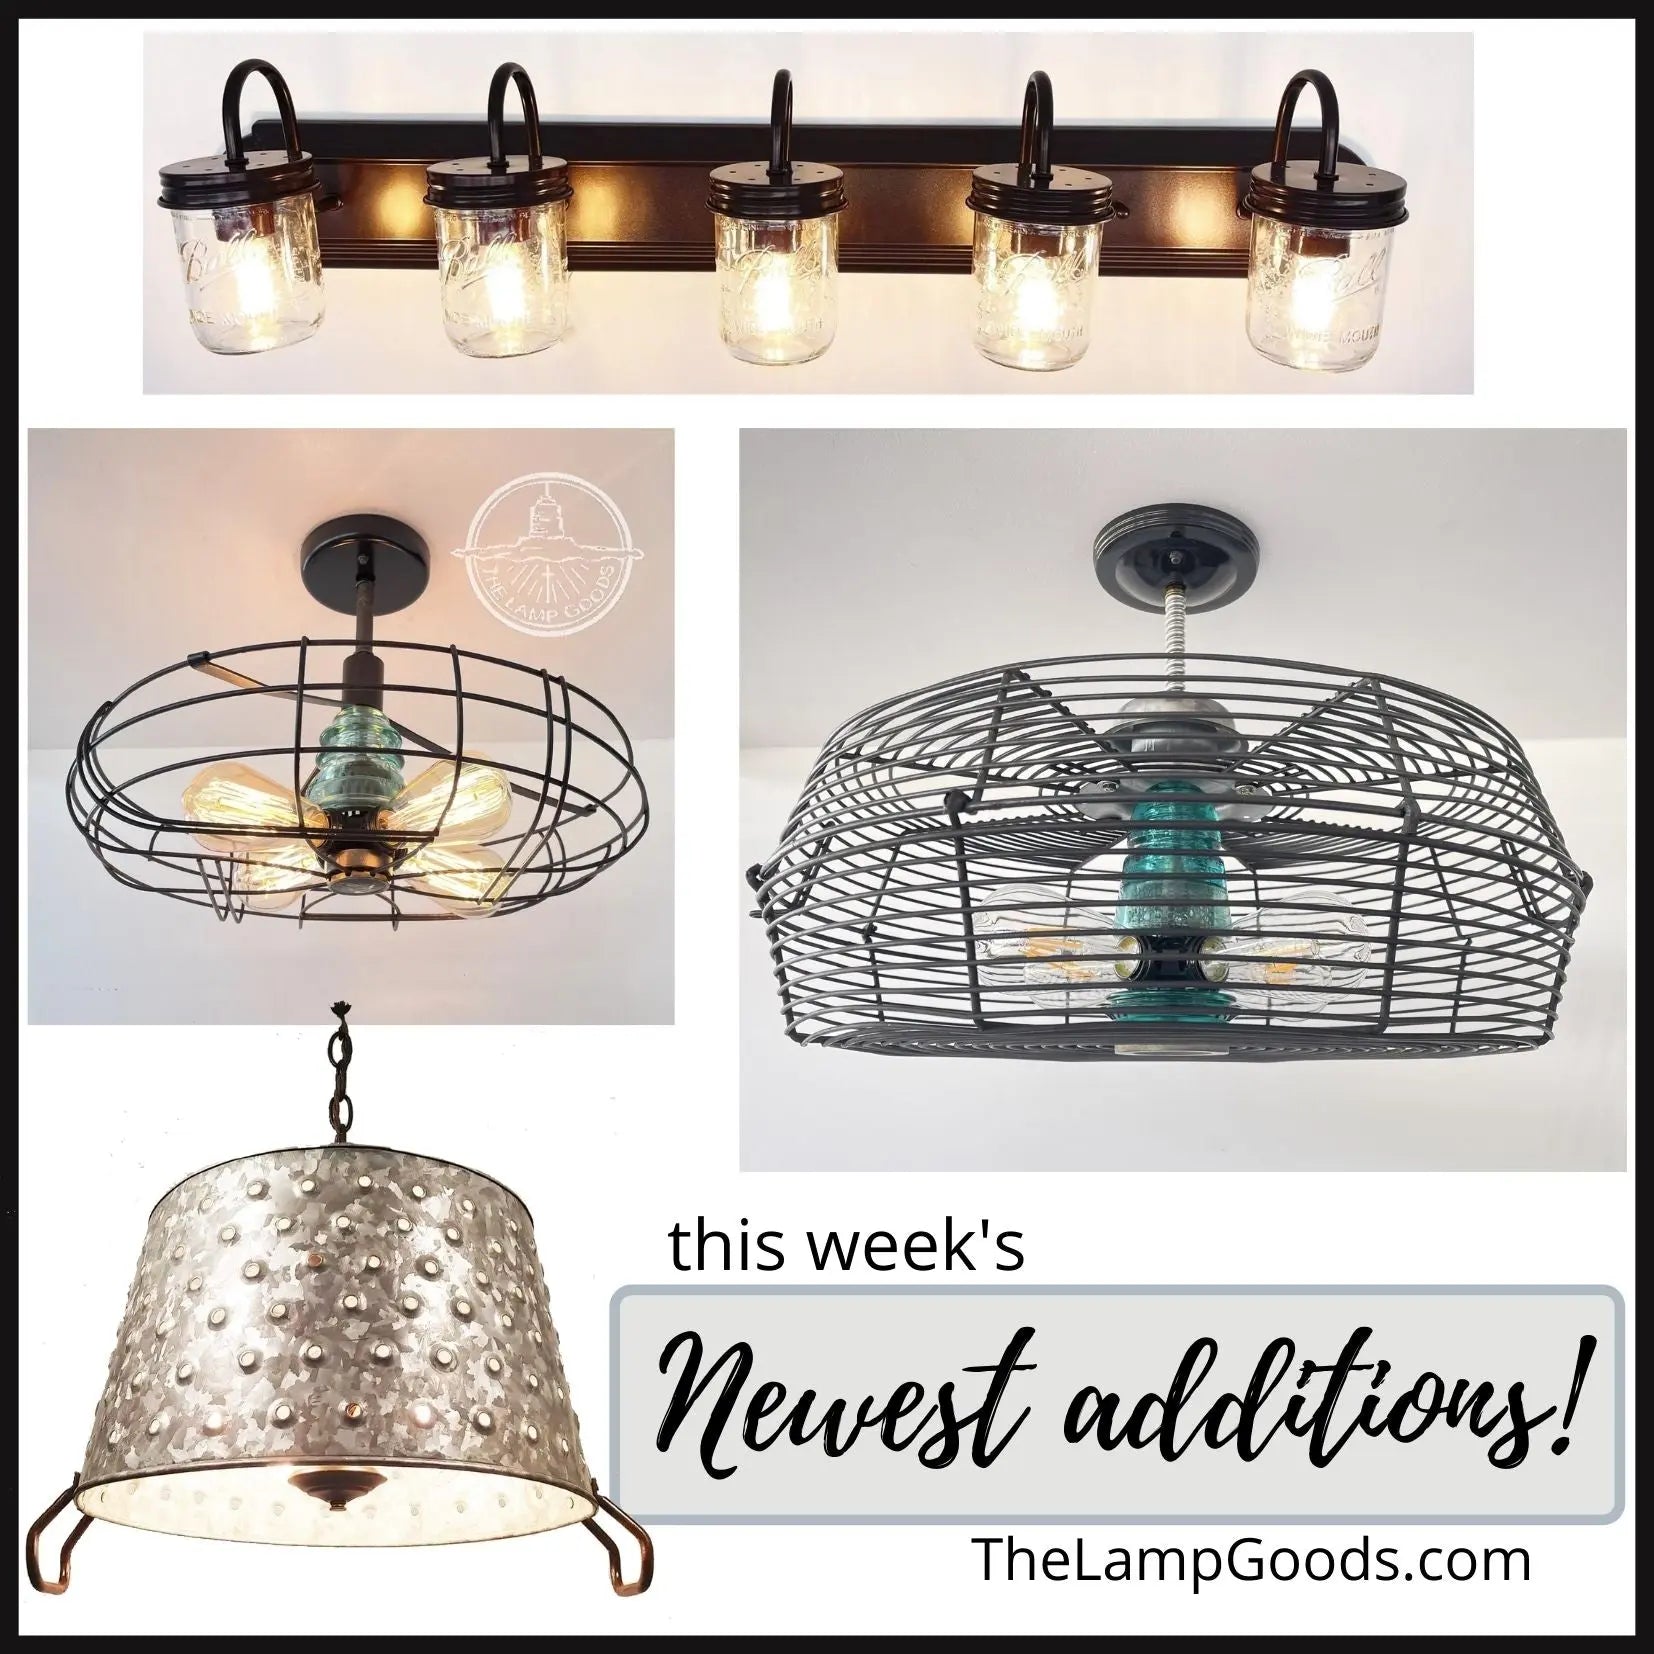 we're FALLING for these new lighting designs!